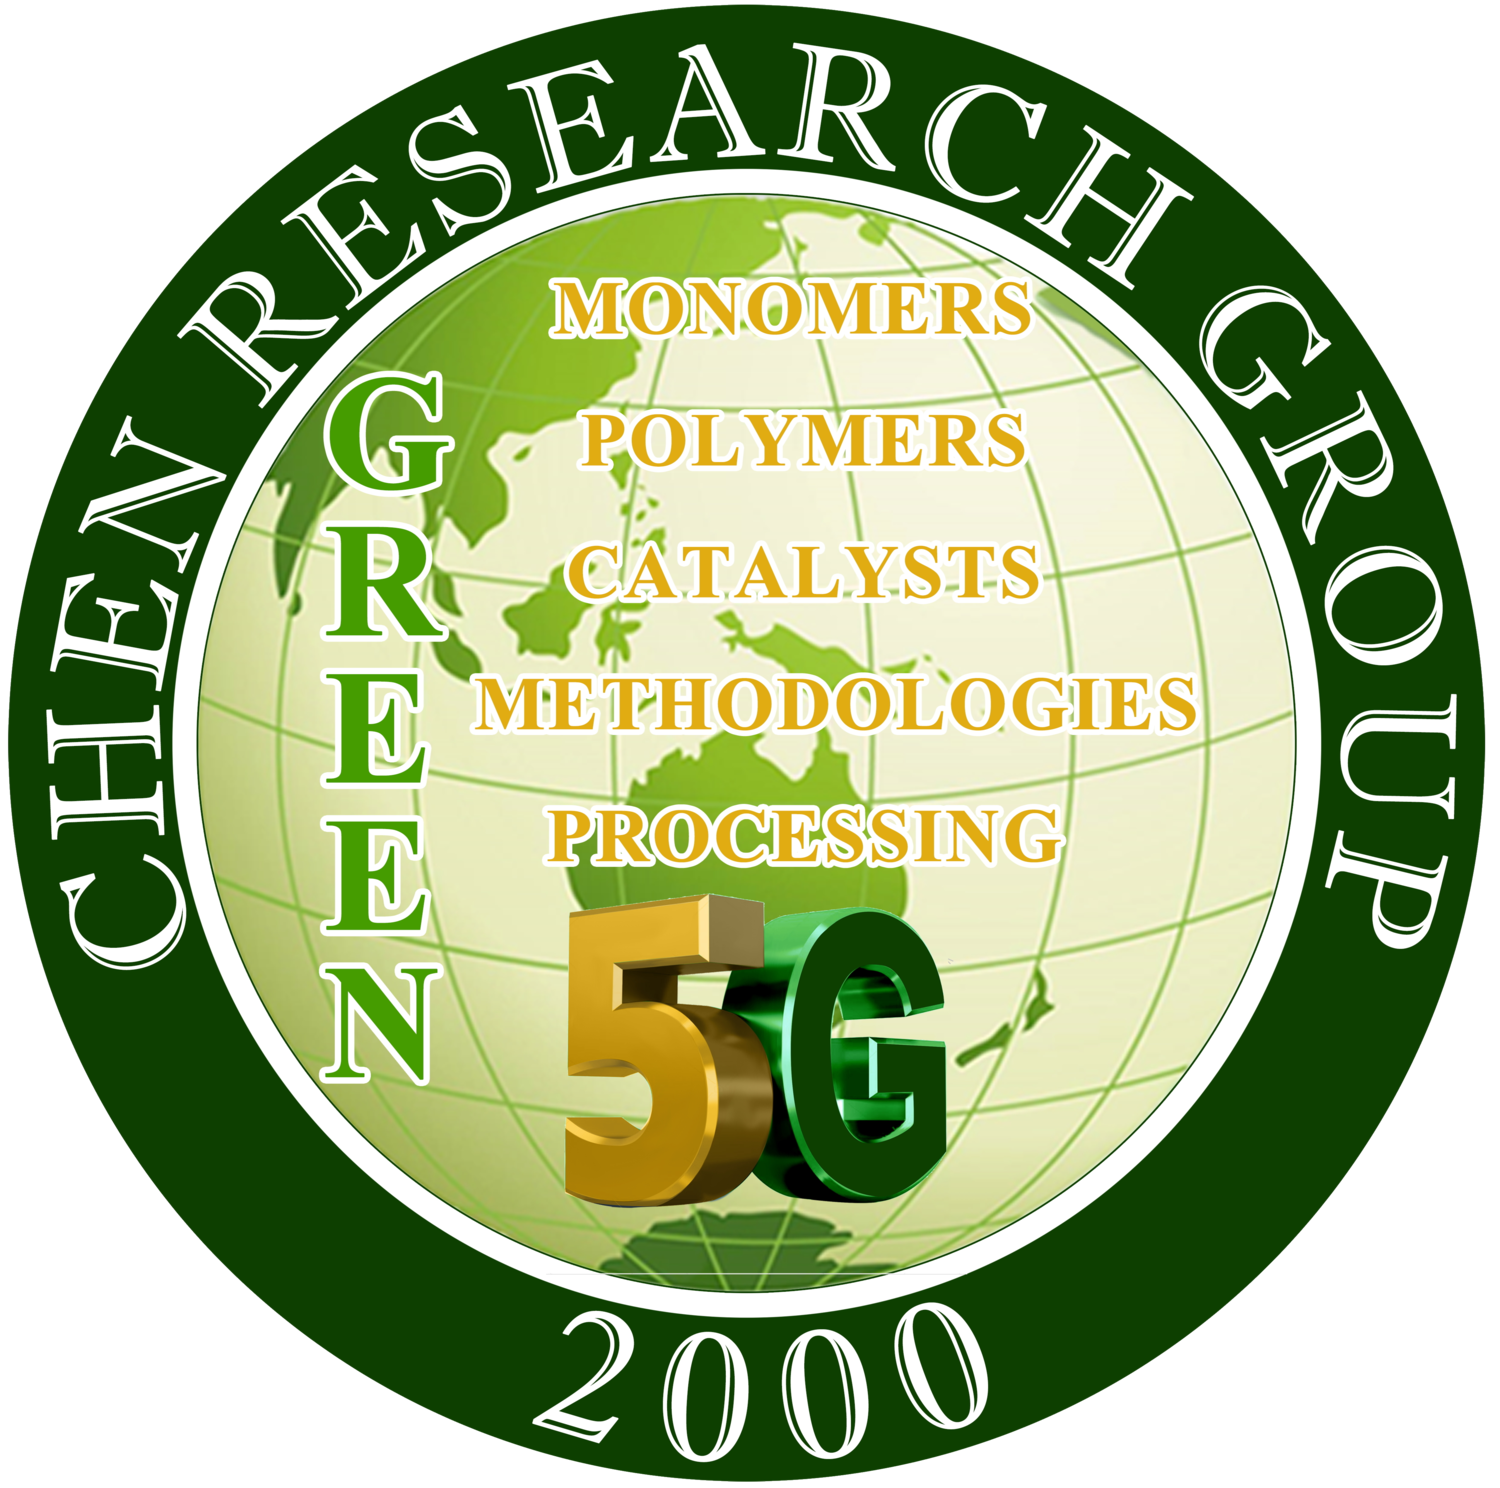 The Chen Group at CSU